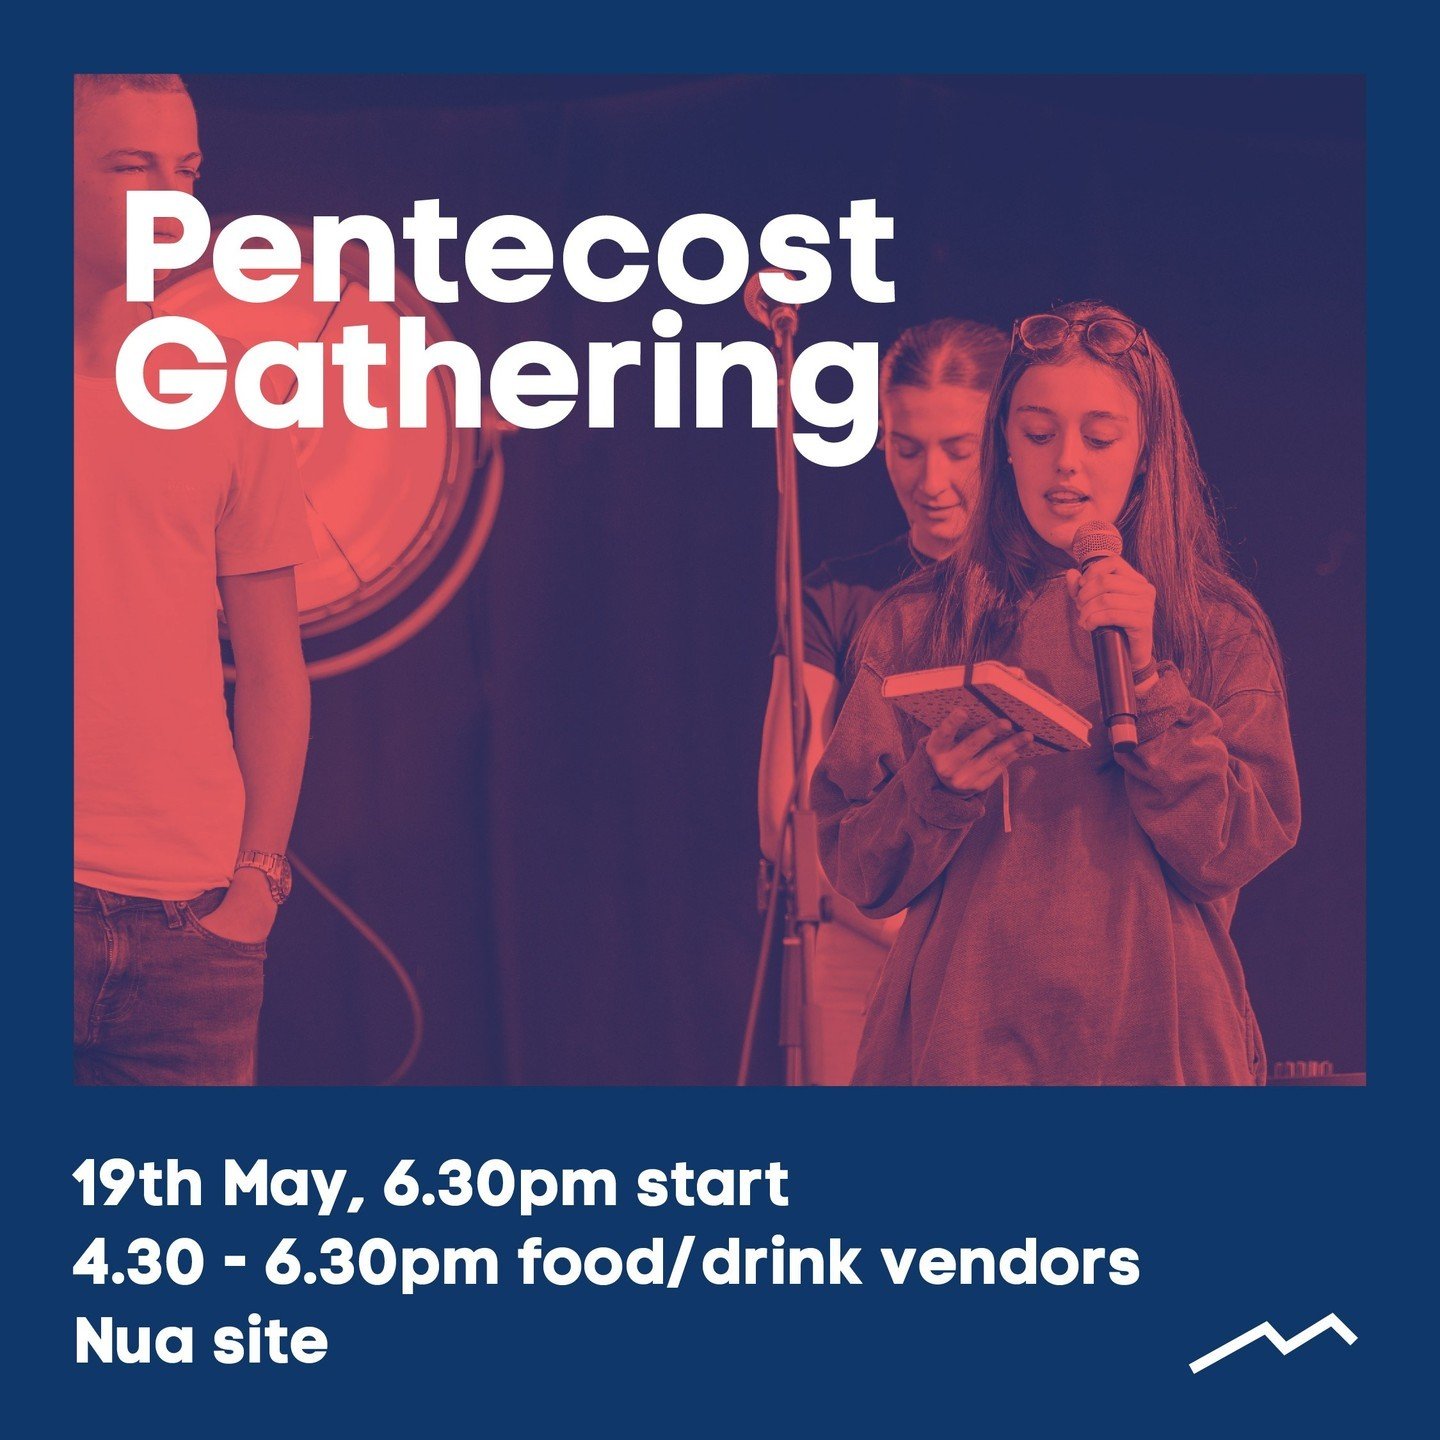 Nua Pentecost Gathering 🔥⁠
⁠
We are so excited to gather with many churches across Ireland to celebrate Pentecost on Sunday 19th May at the Nua site, Newcastle, 6:30pm start with food trucks from 4:30pm. ⁠